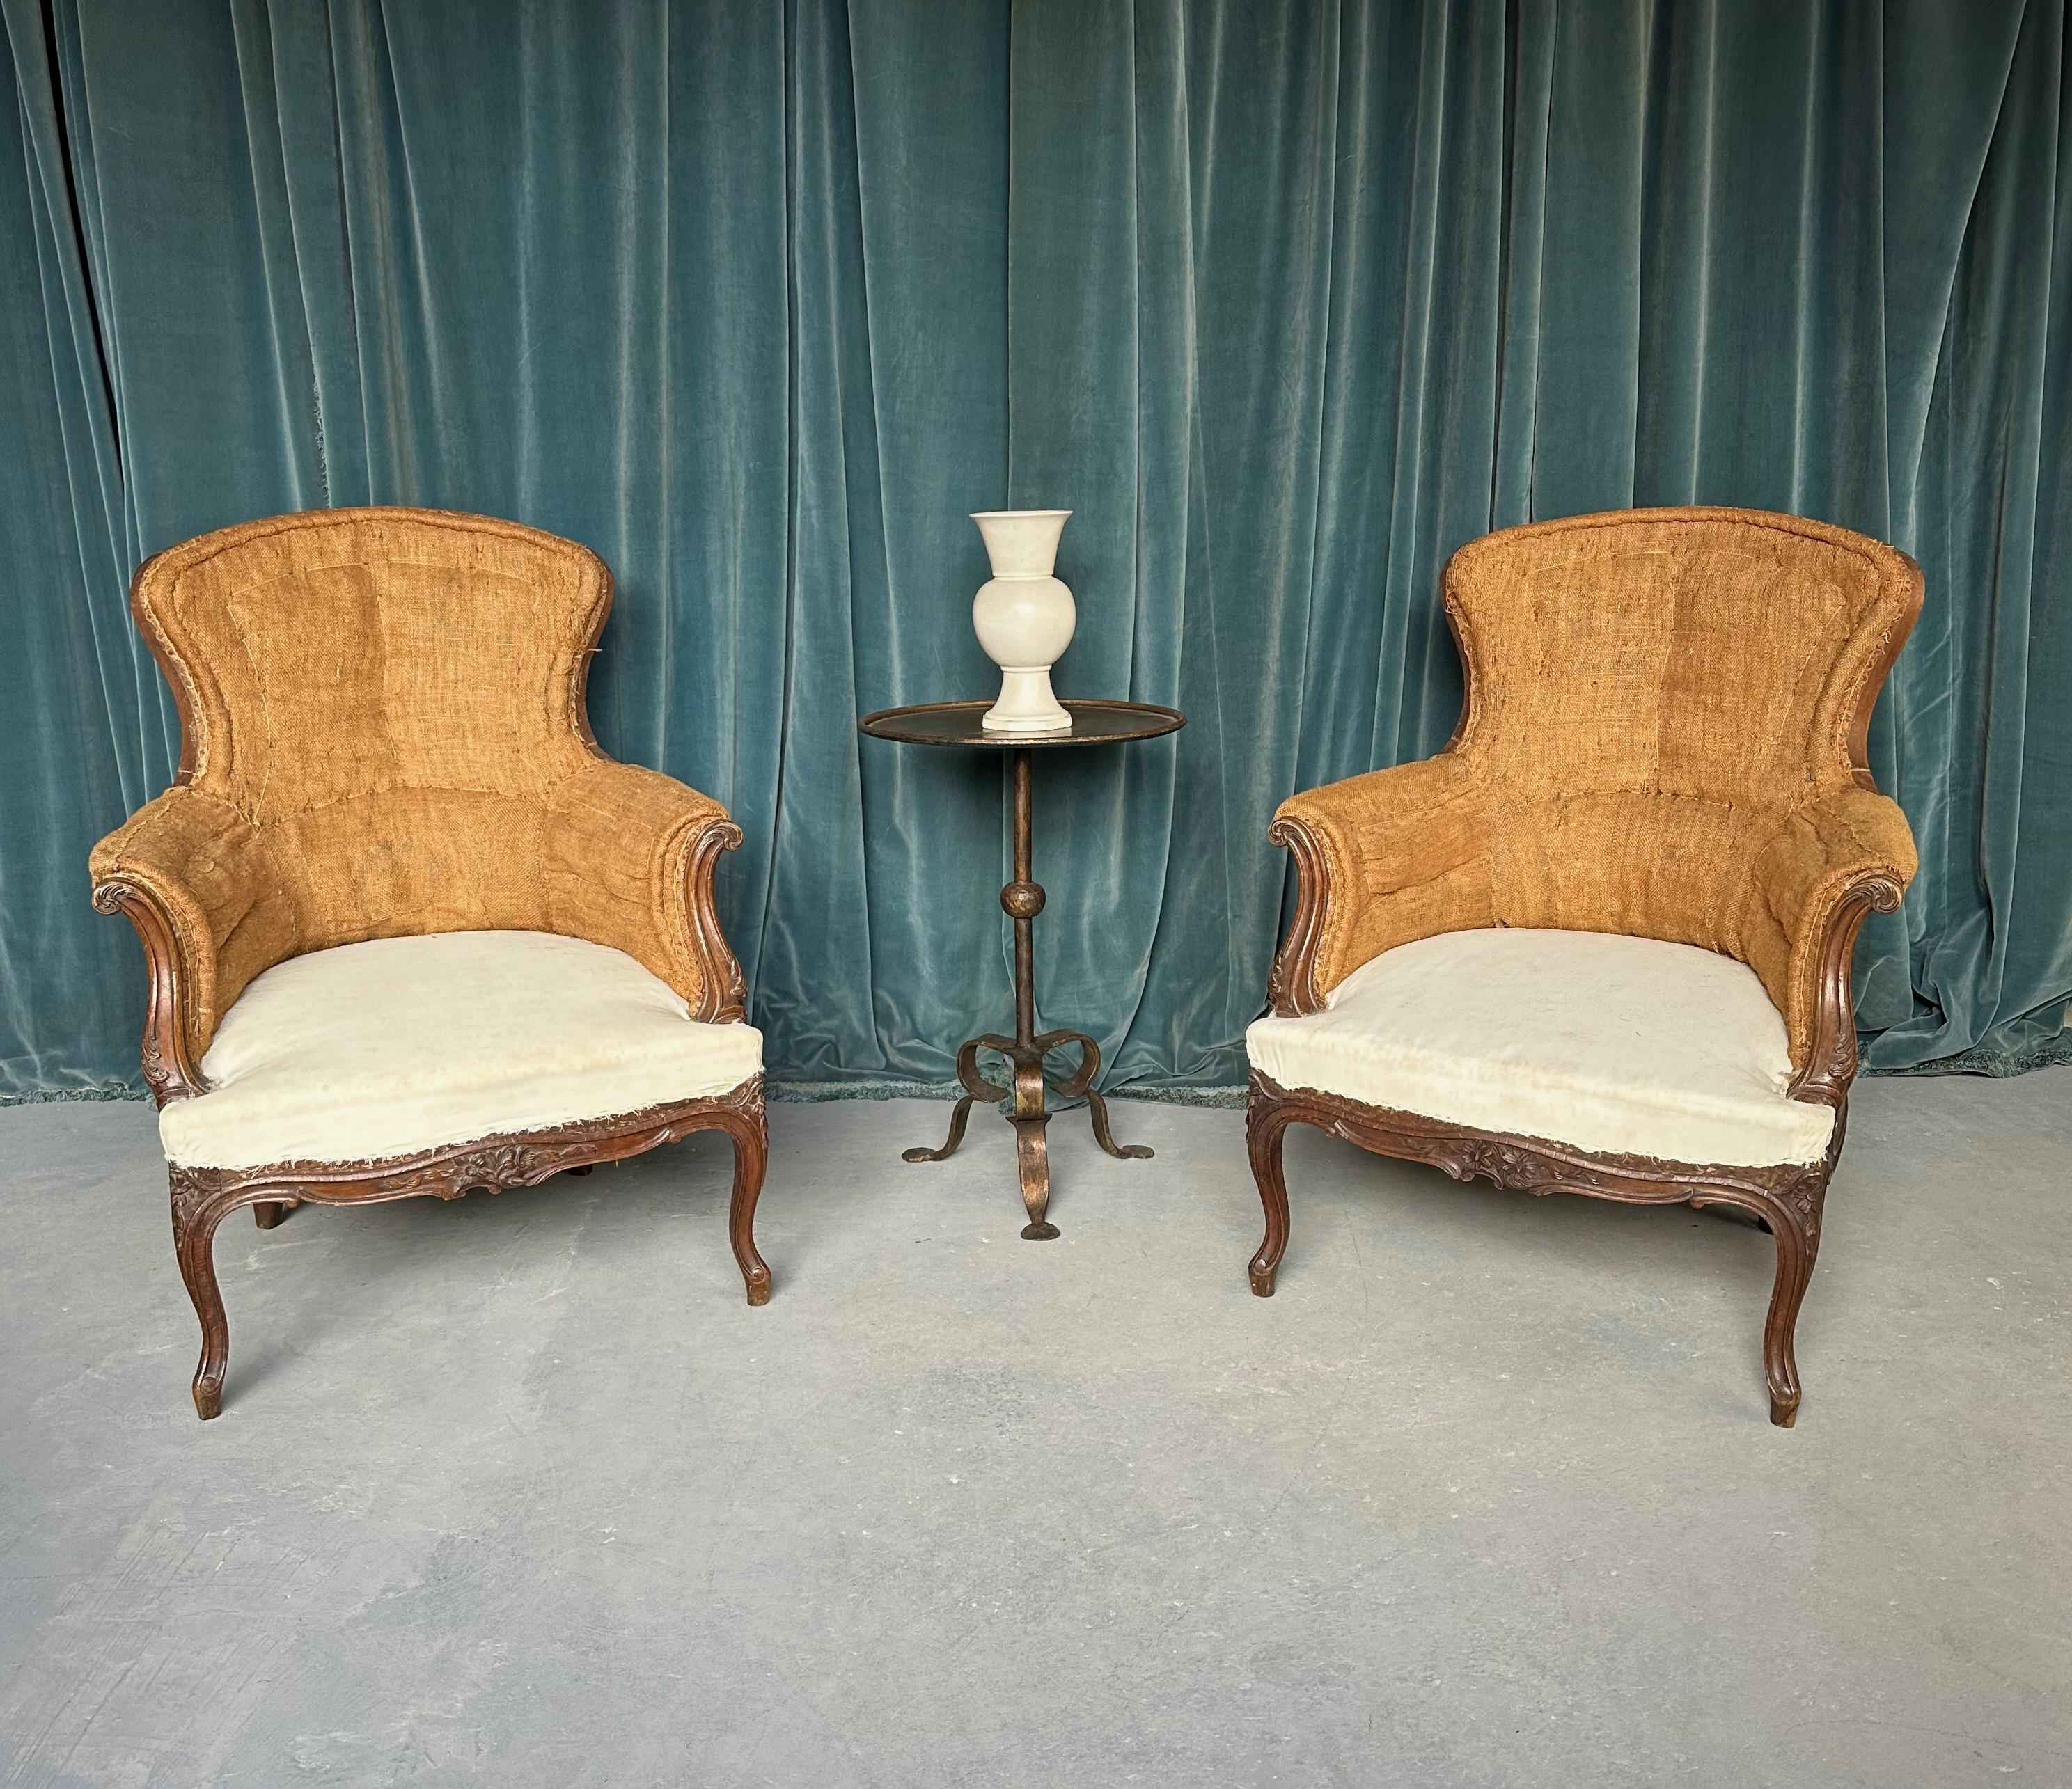 An elegant pair French Napoleon III armchairs inspired by the Louis XV period with elaborately carved fruitwood frames with floral motives. The chairs have been stripped down to the original muslin, and are ready to be upholstered in the fabric of